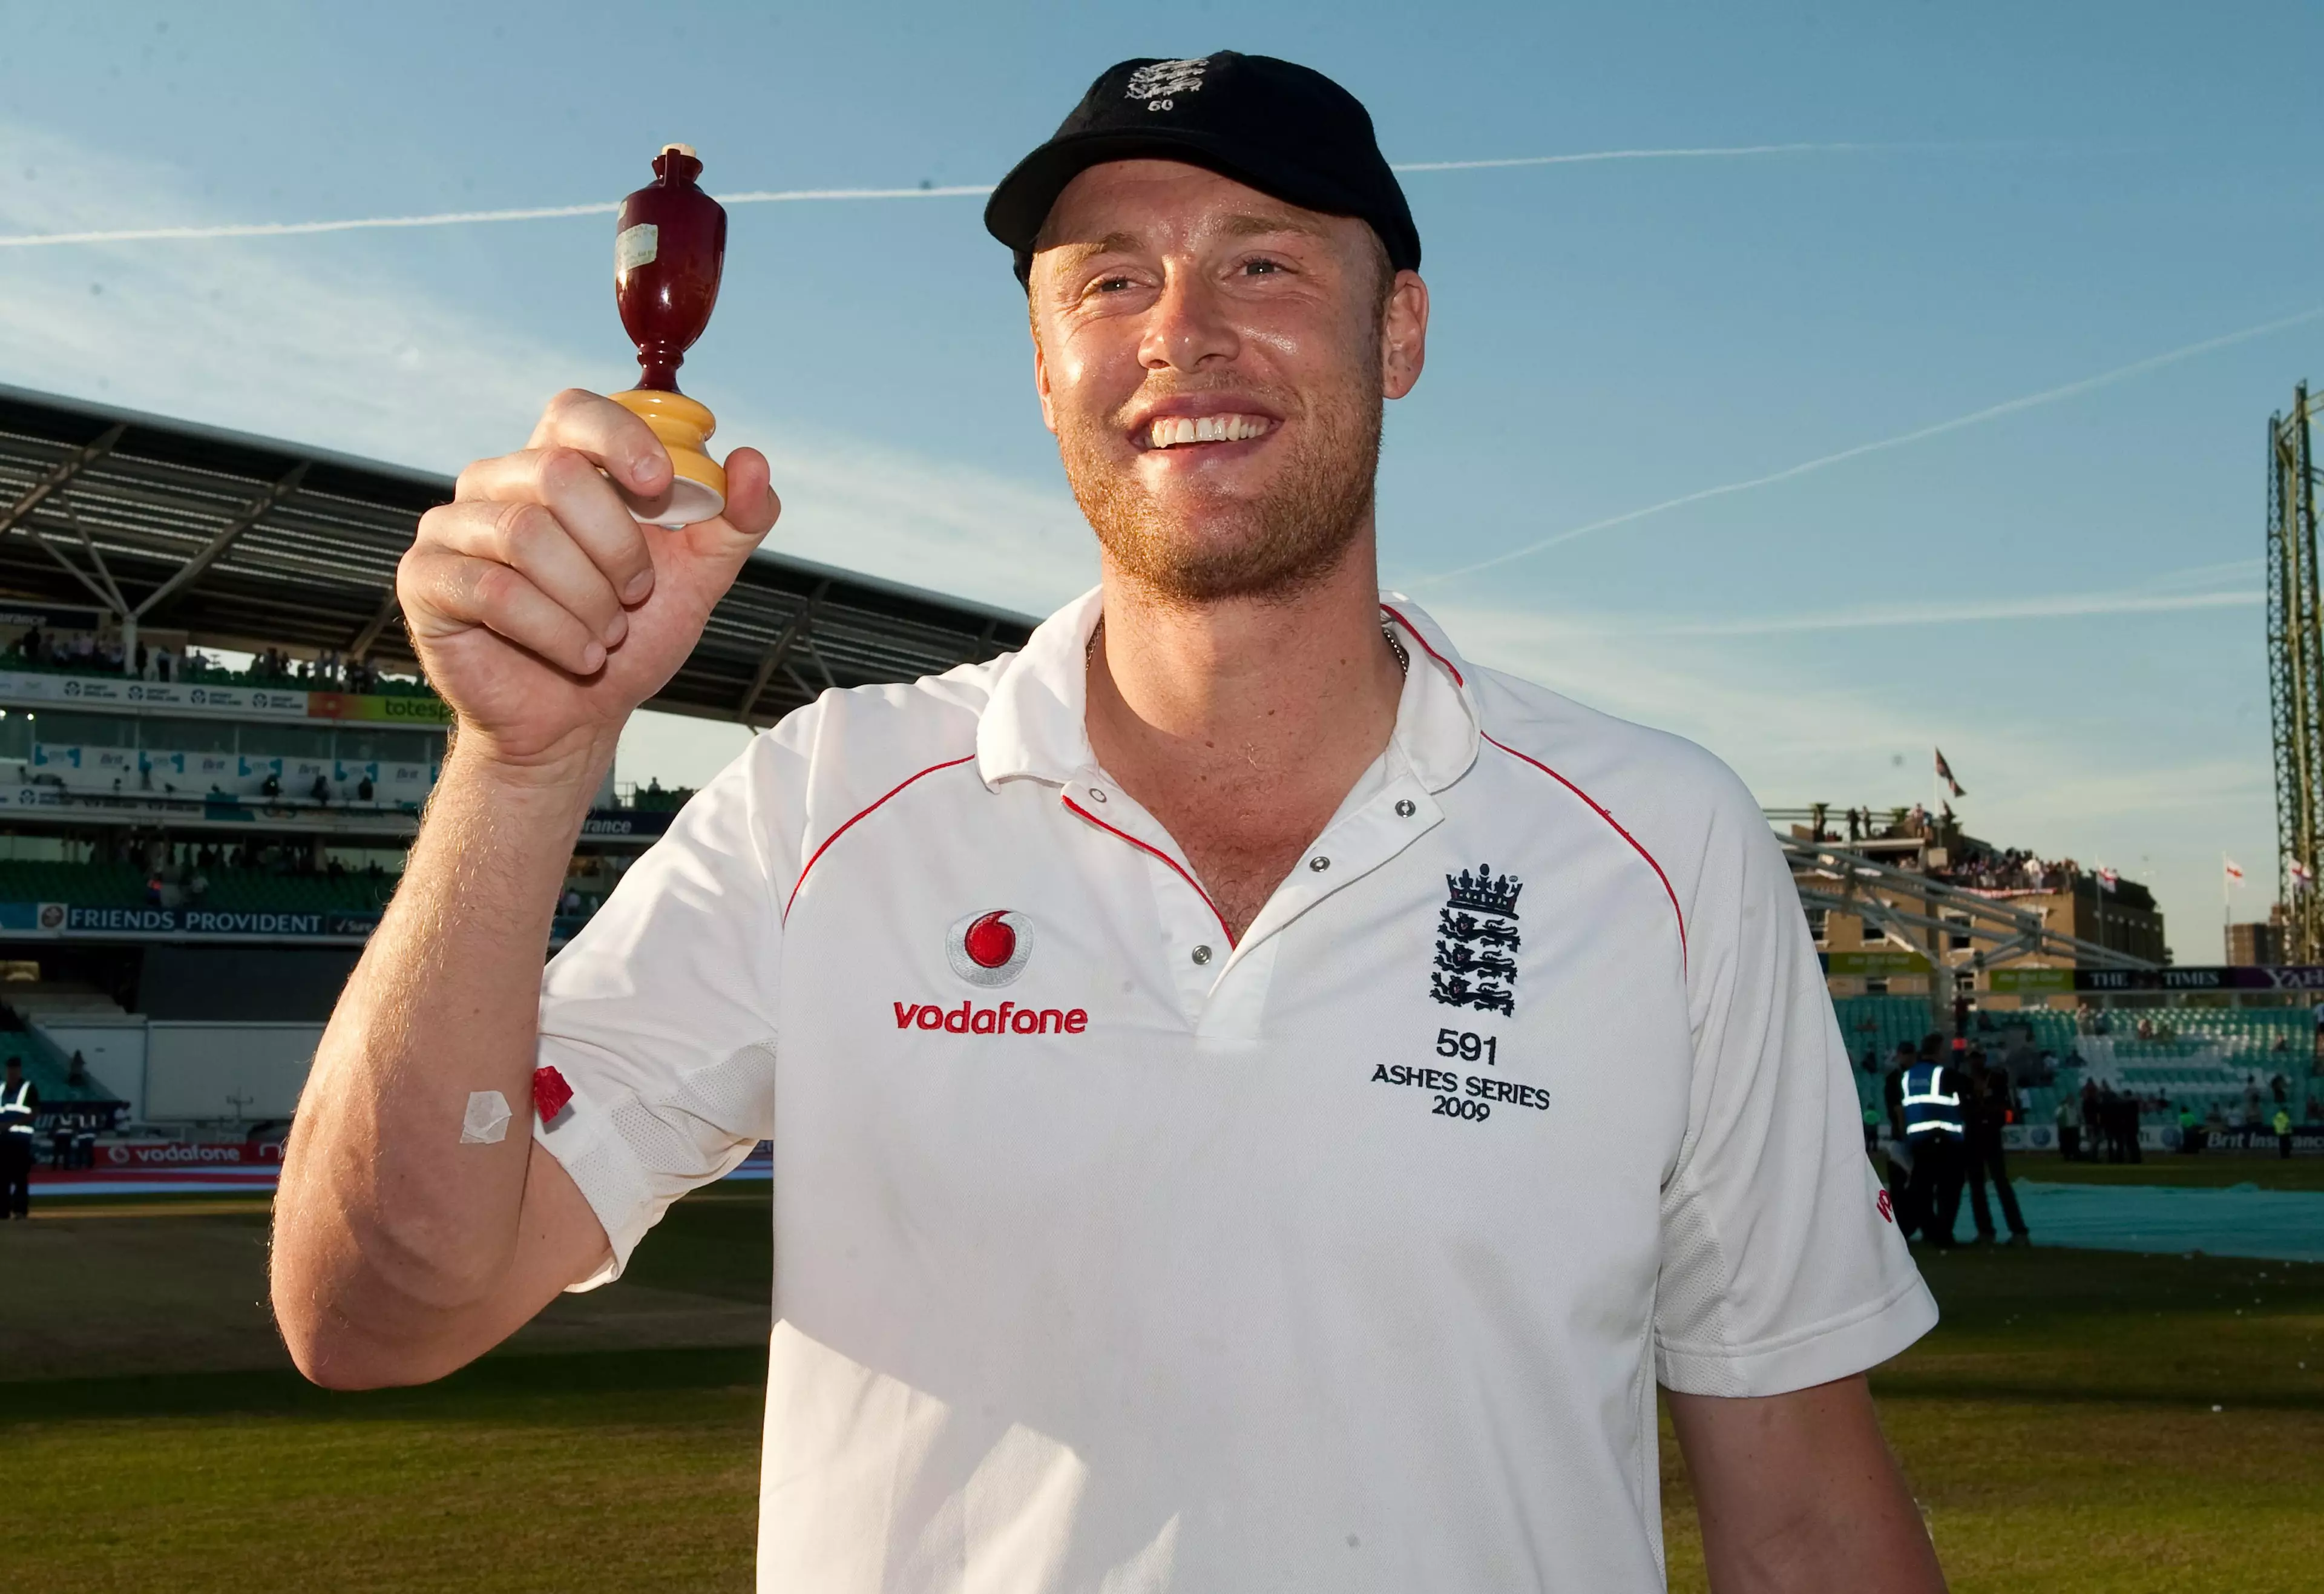 Freddie Flintoff said being known as a 'fat cricketer' affected his mental health.